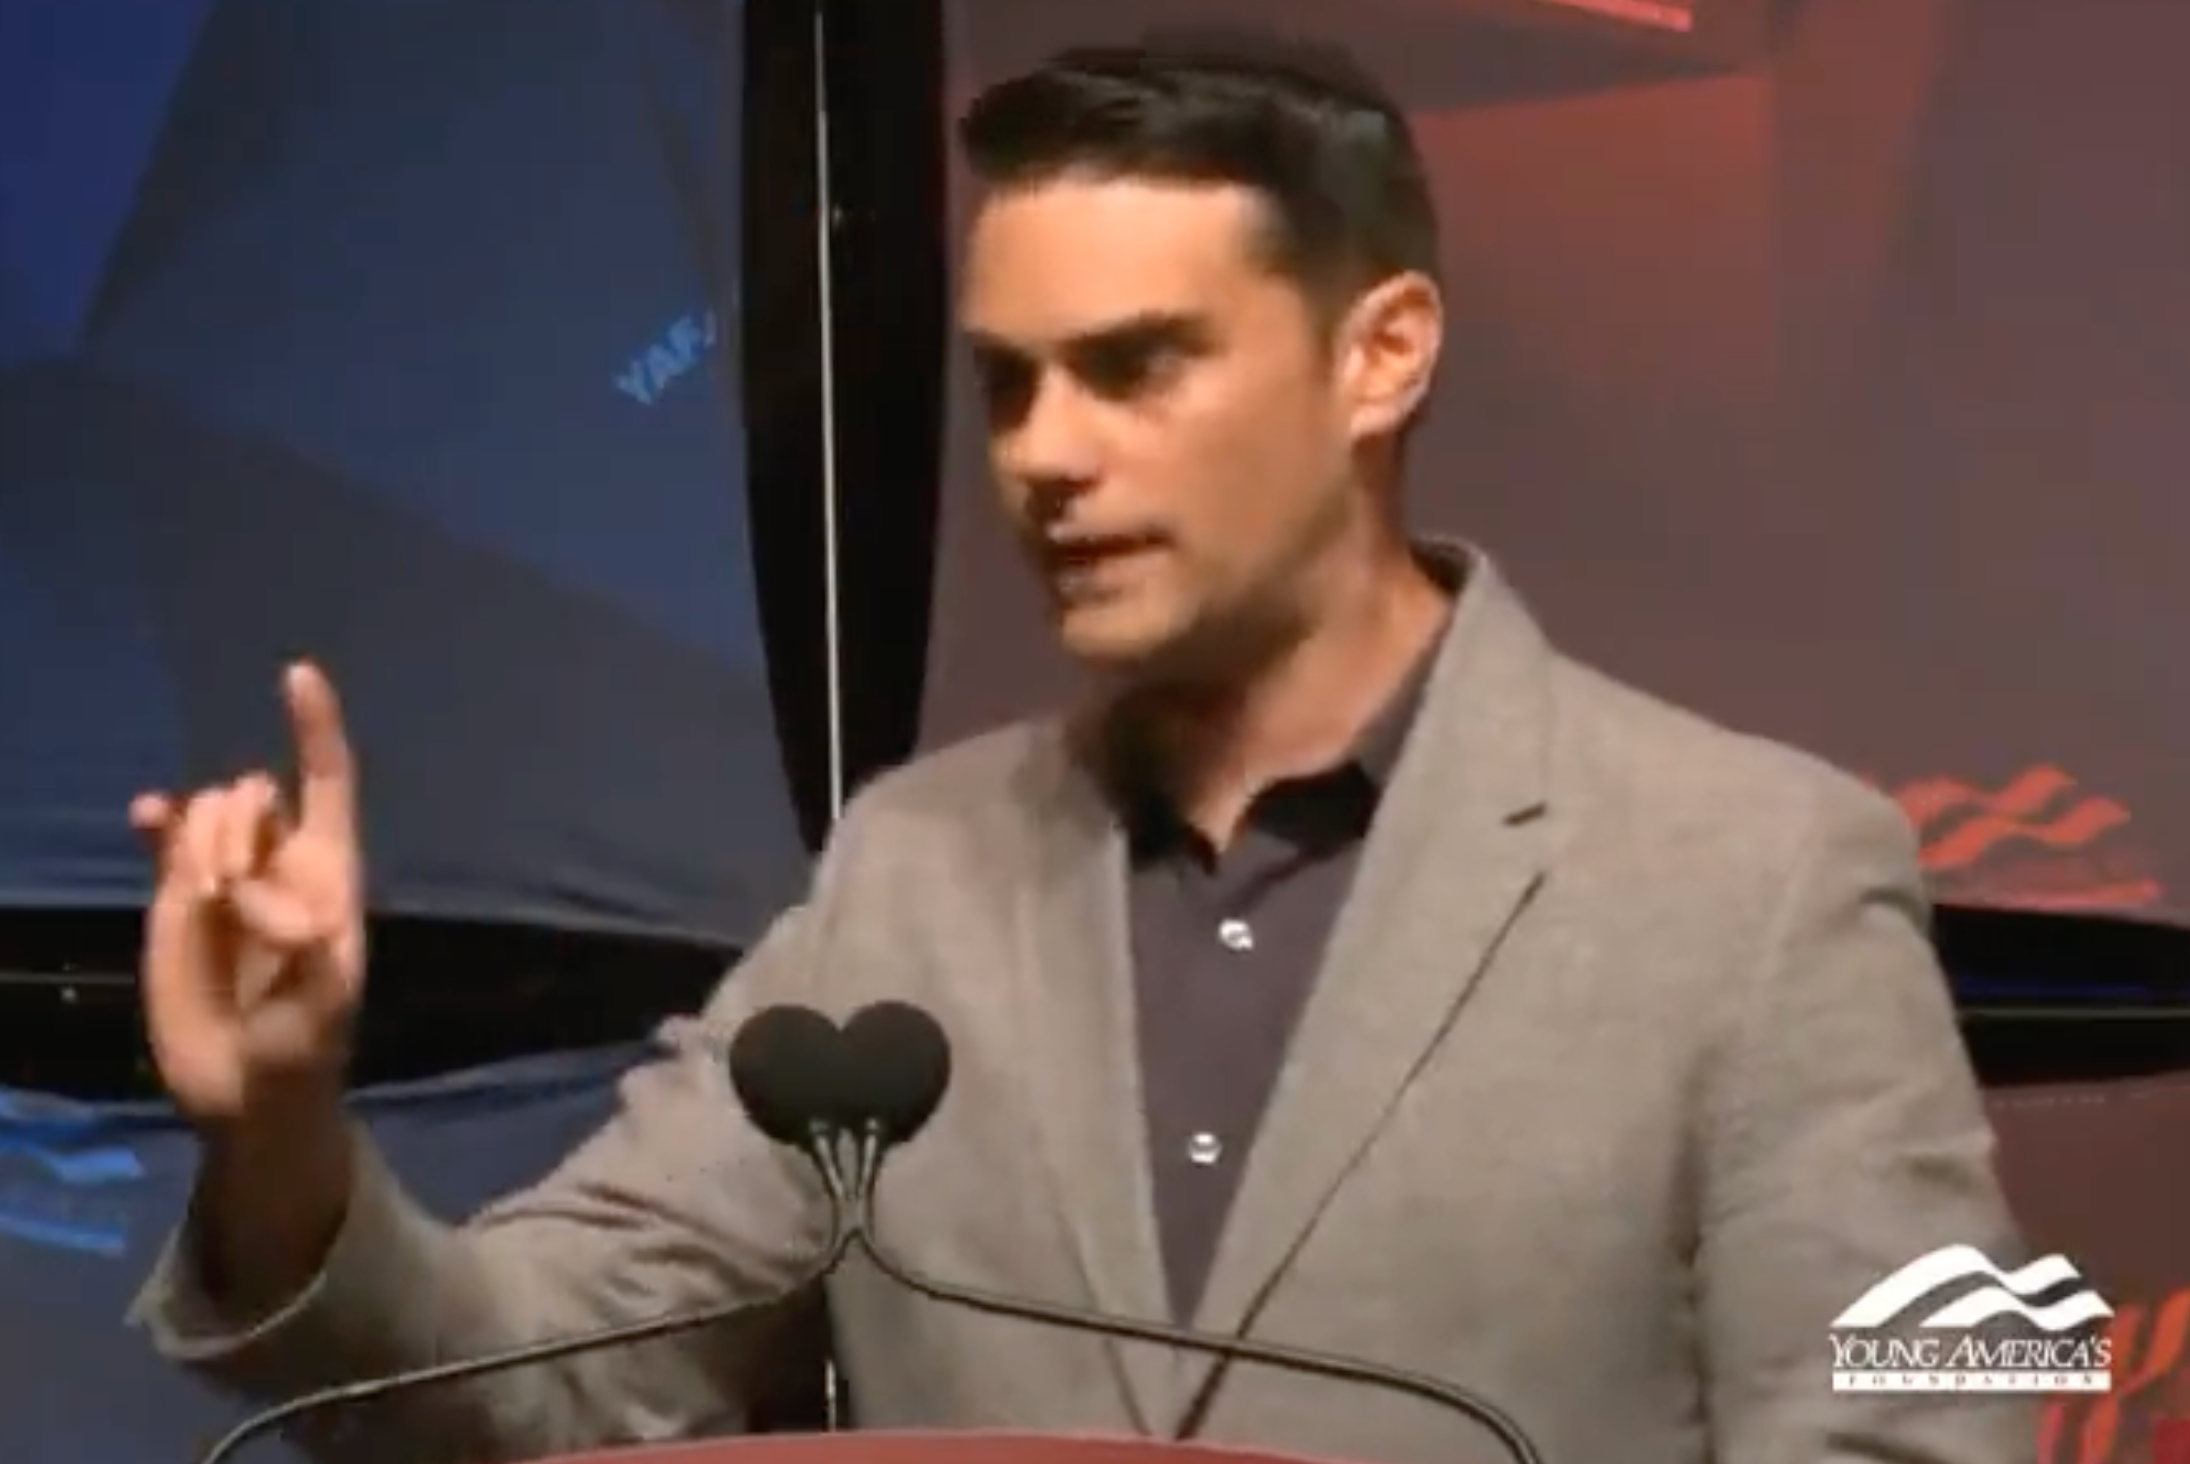 Ben Shapiro makes a point during a discussion with a Democratic activist on Tuesday